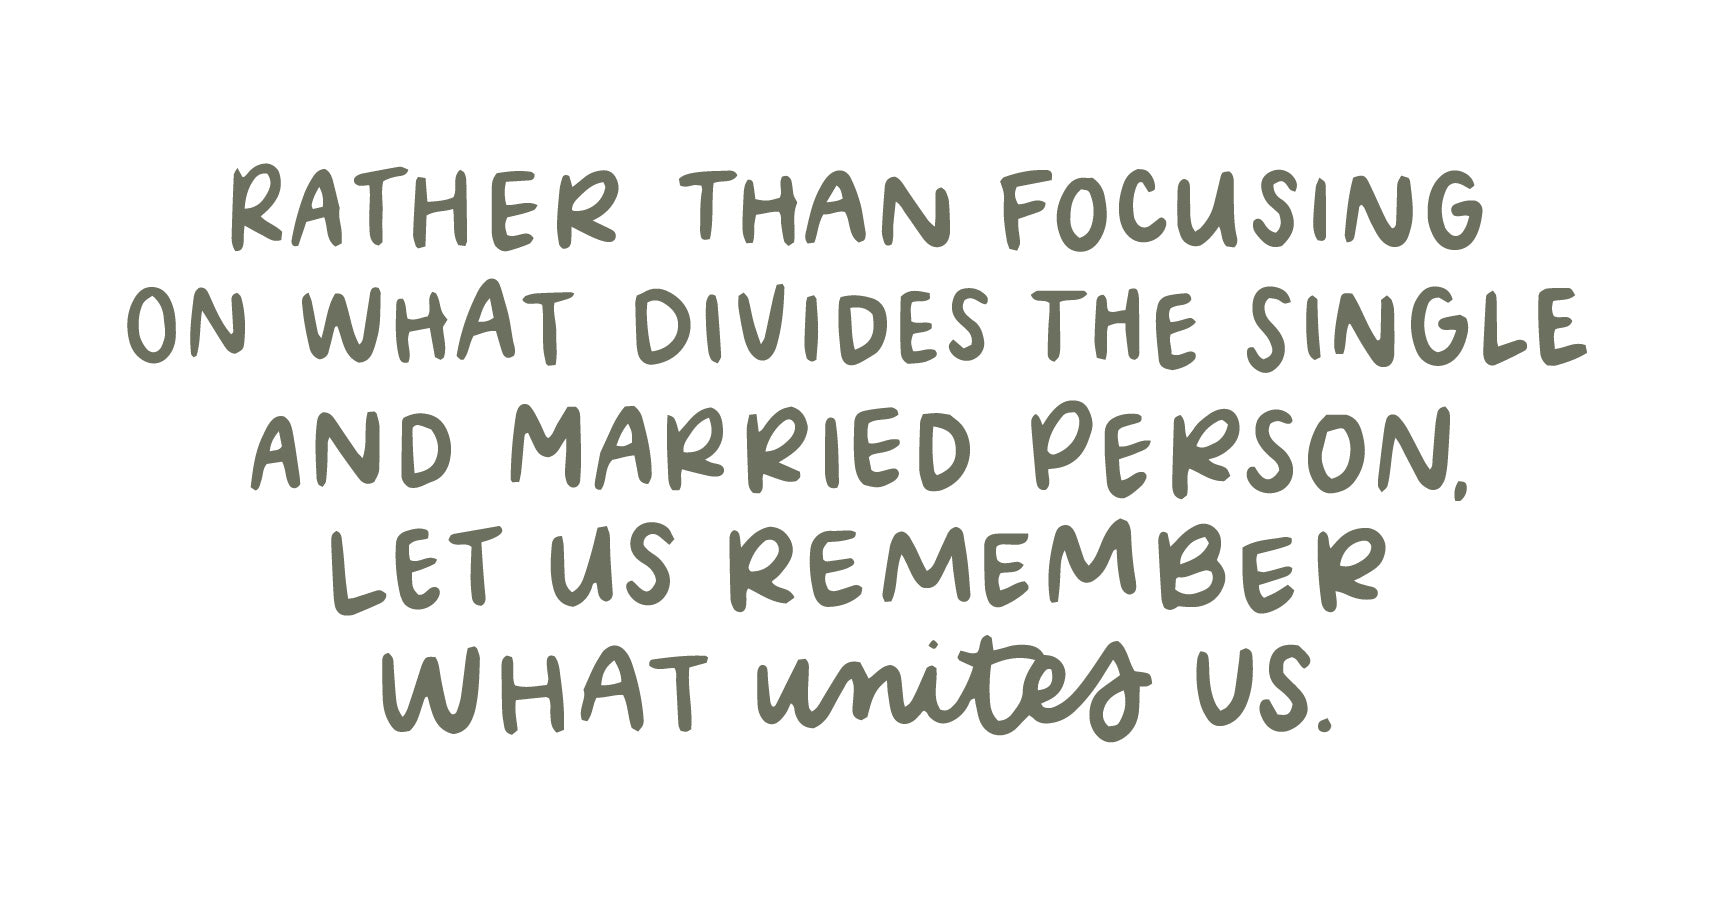 Let us remember what unites us | The Daily Grace Co.